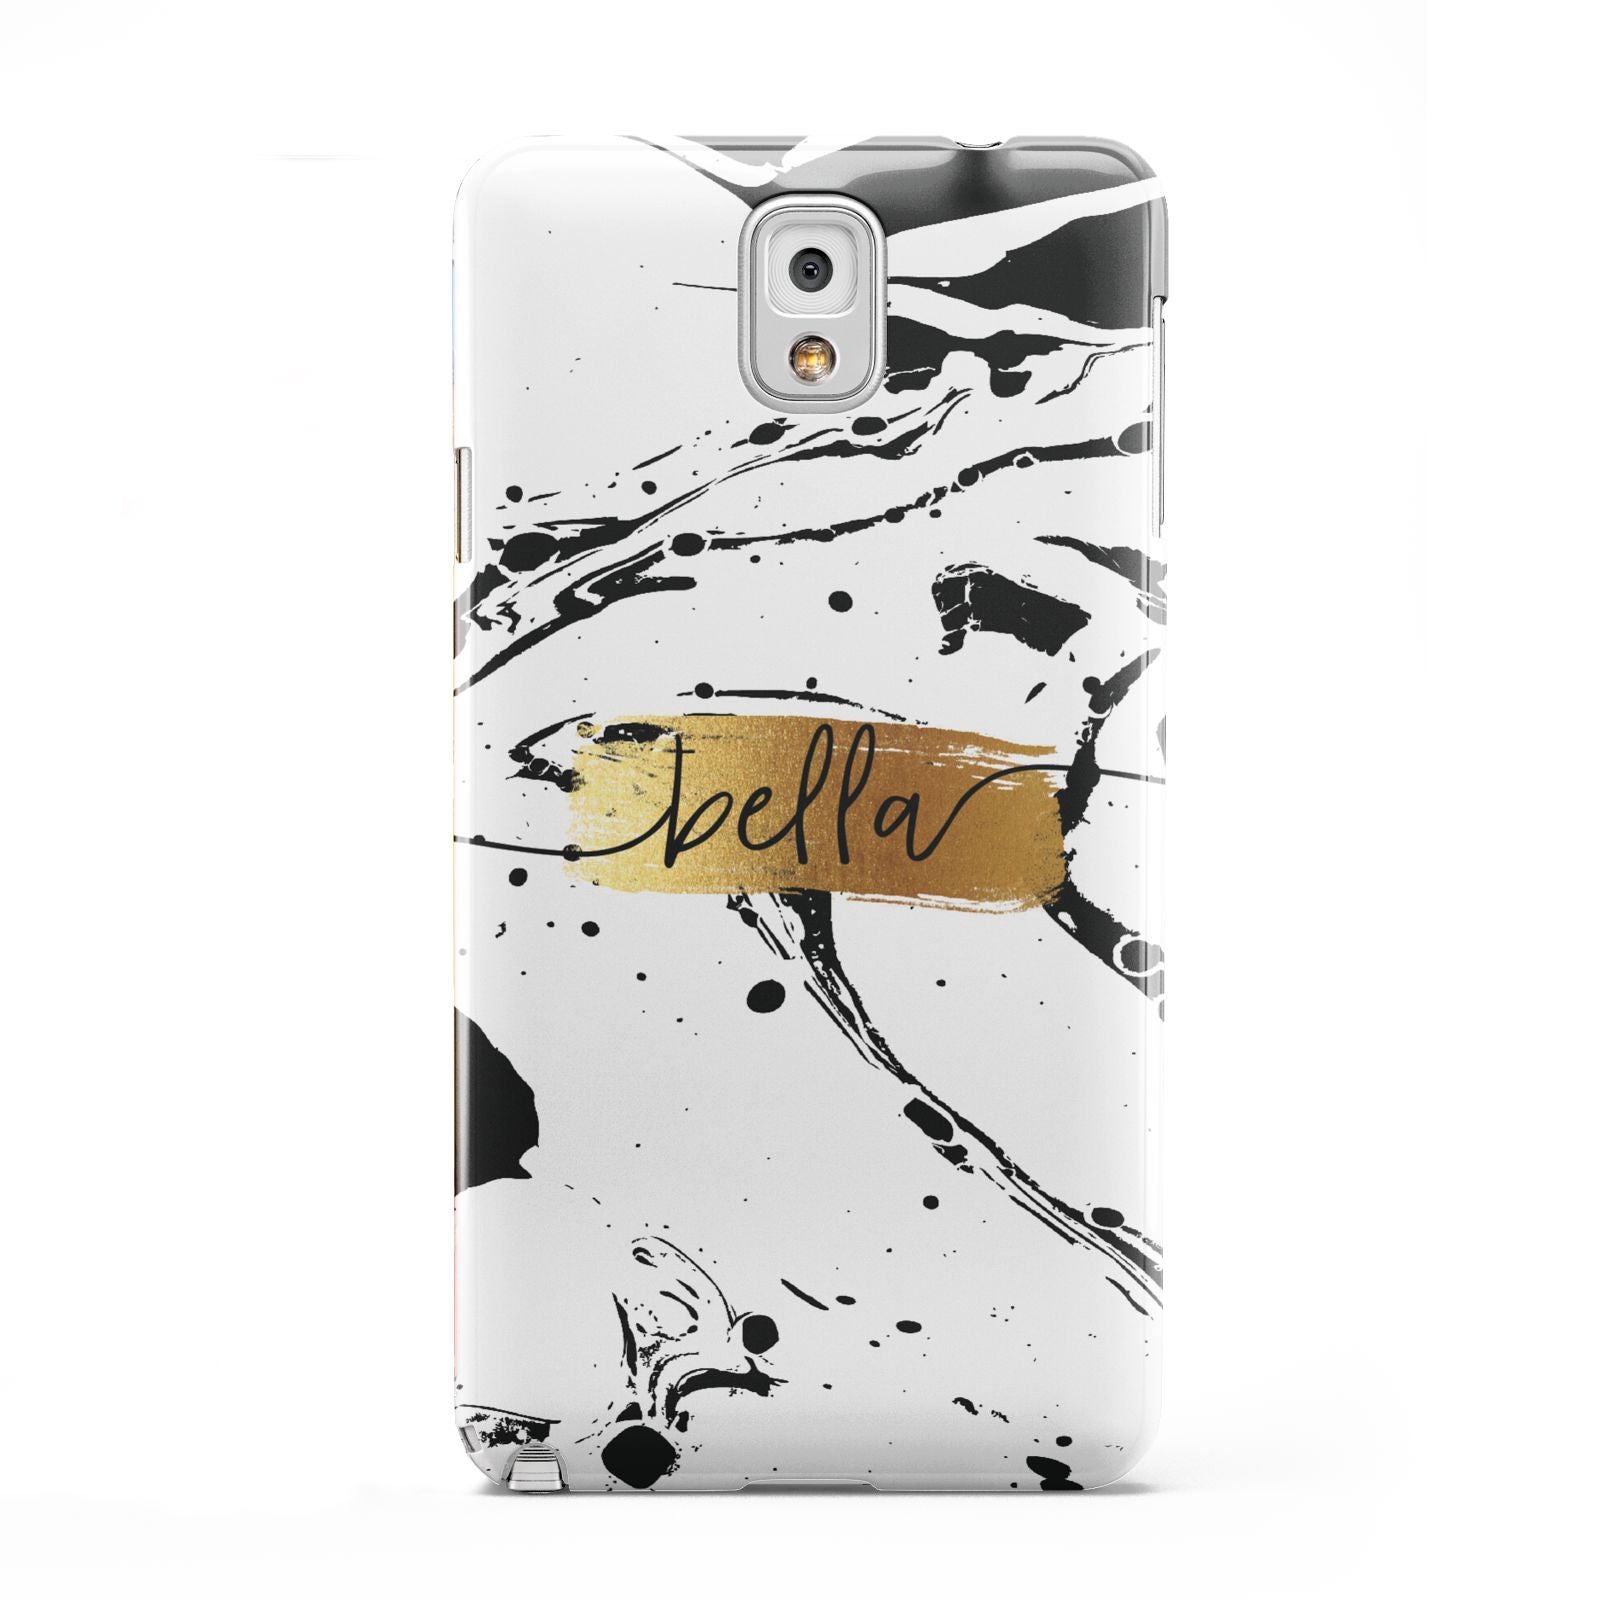 Personalised White Gold Swirl Marble Samsung Galaxy Note 3 Case